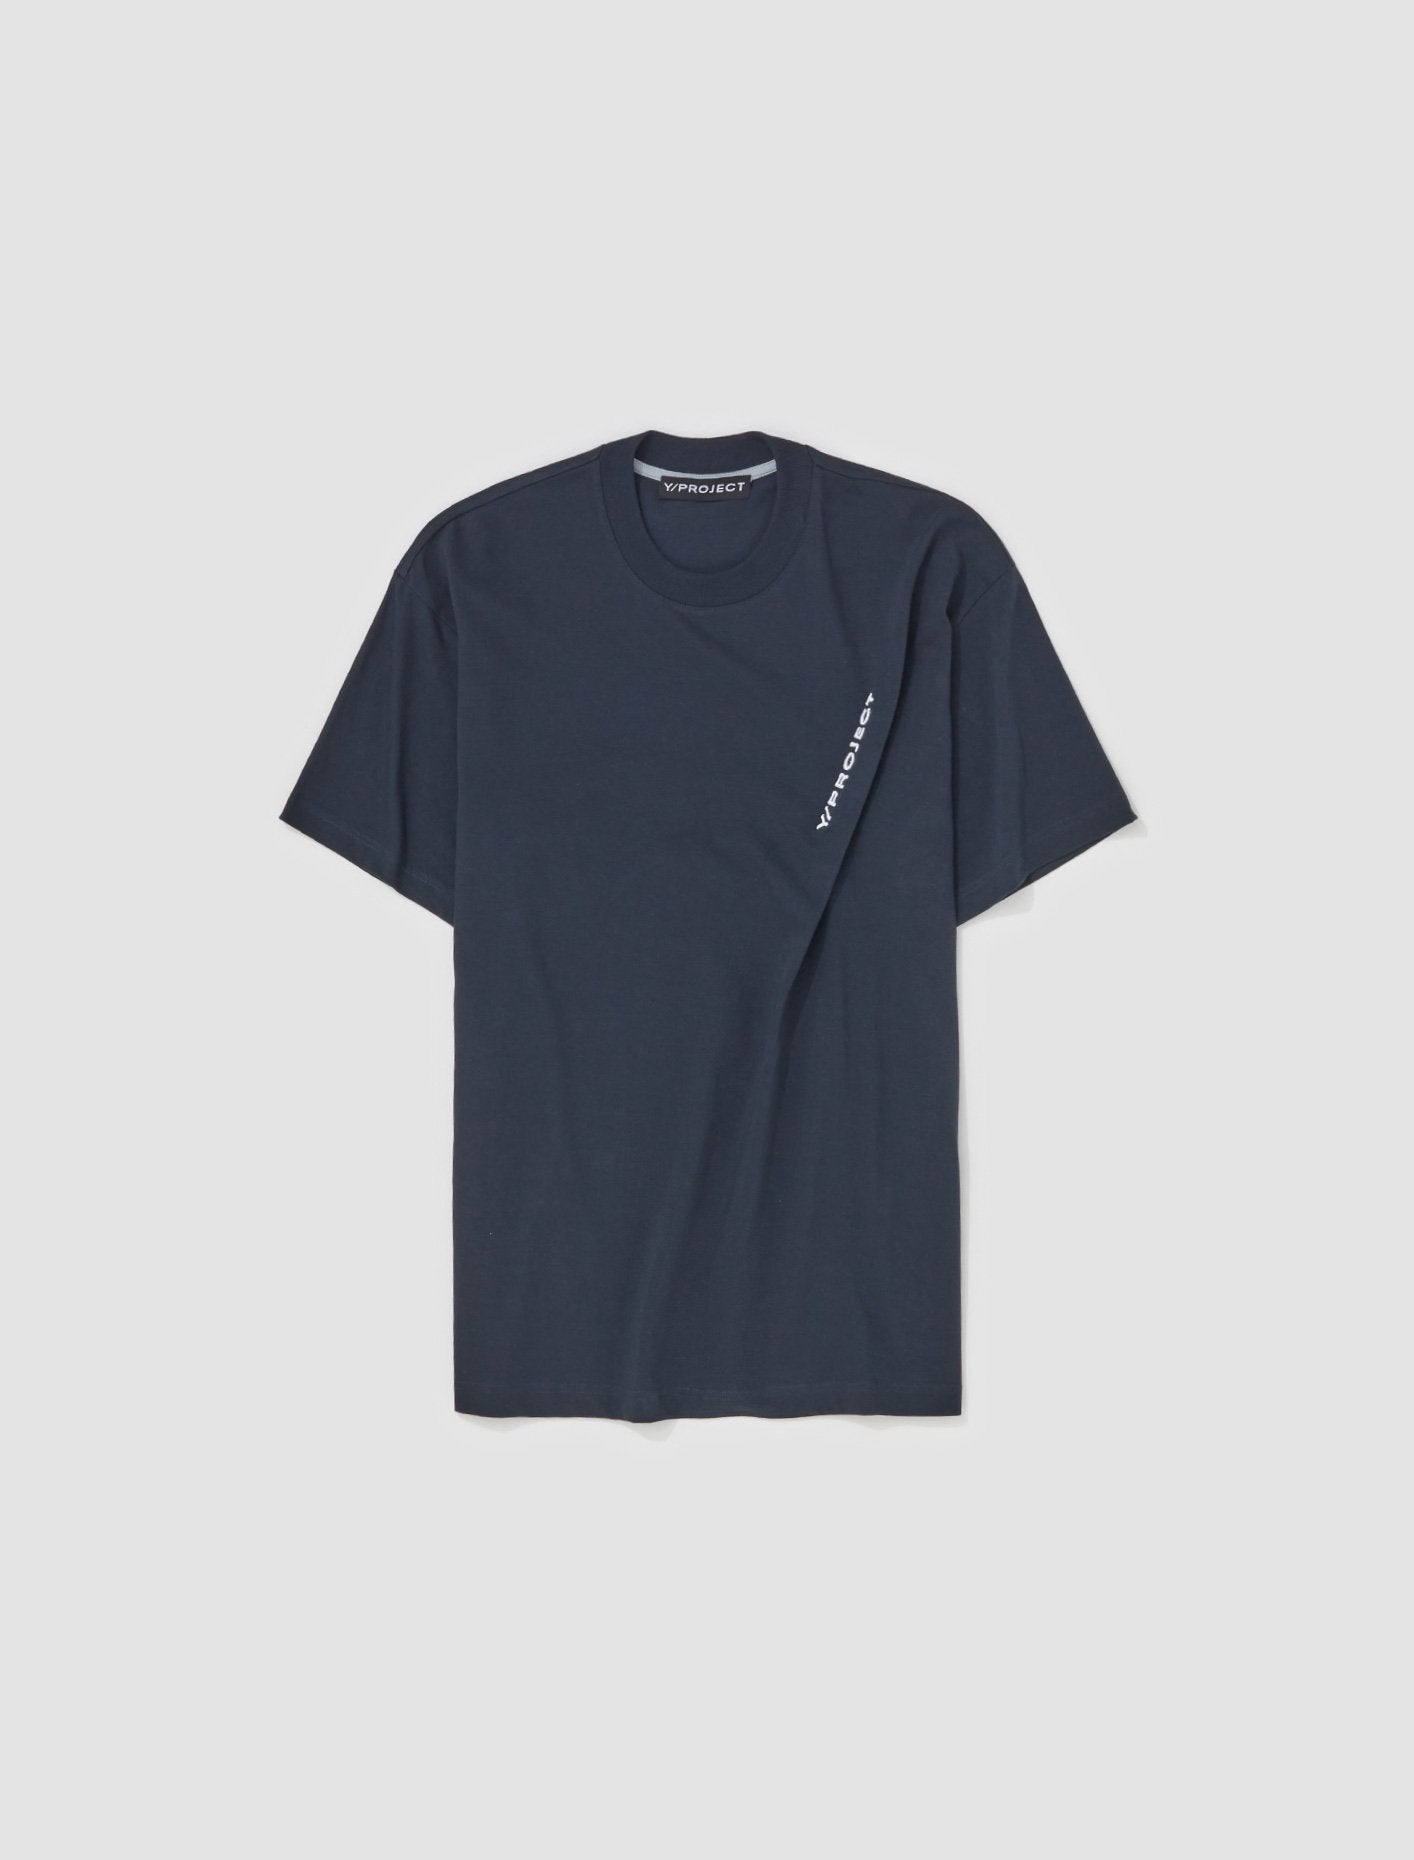 Pinched Logo T-Shirt in Charcoal